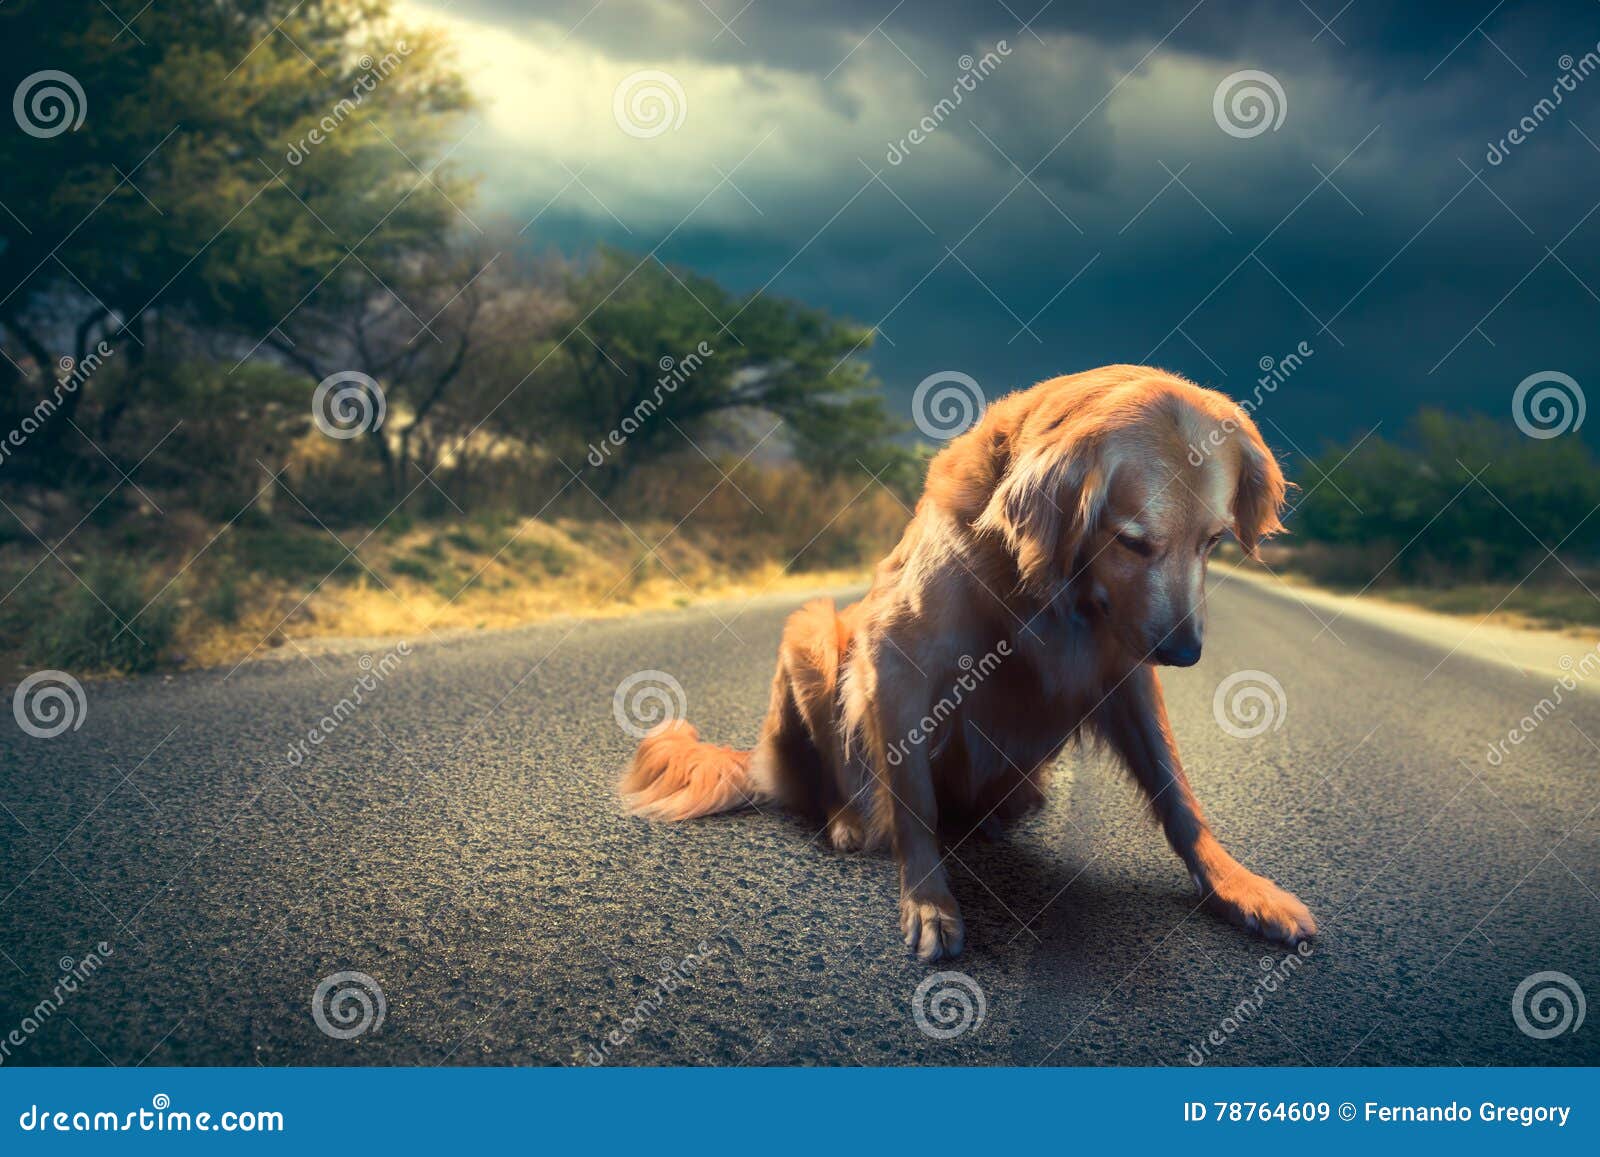 sad, abandoned dog in the middle of the road /high contrast image